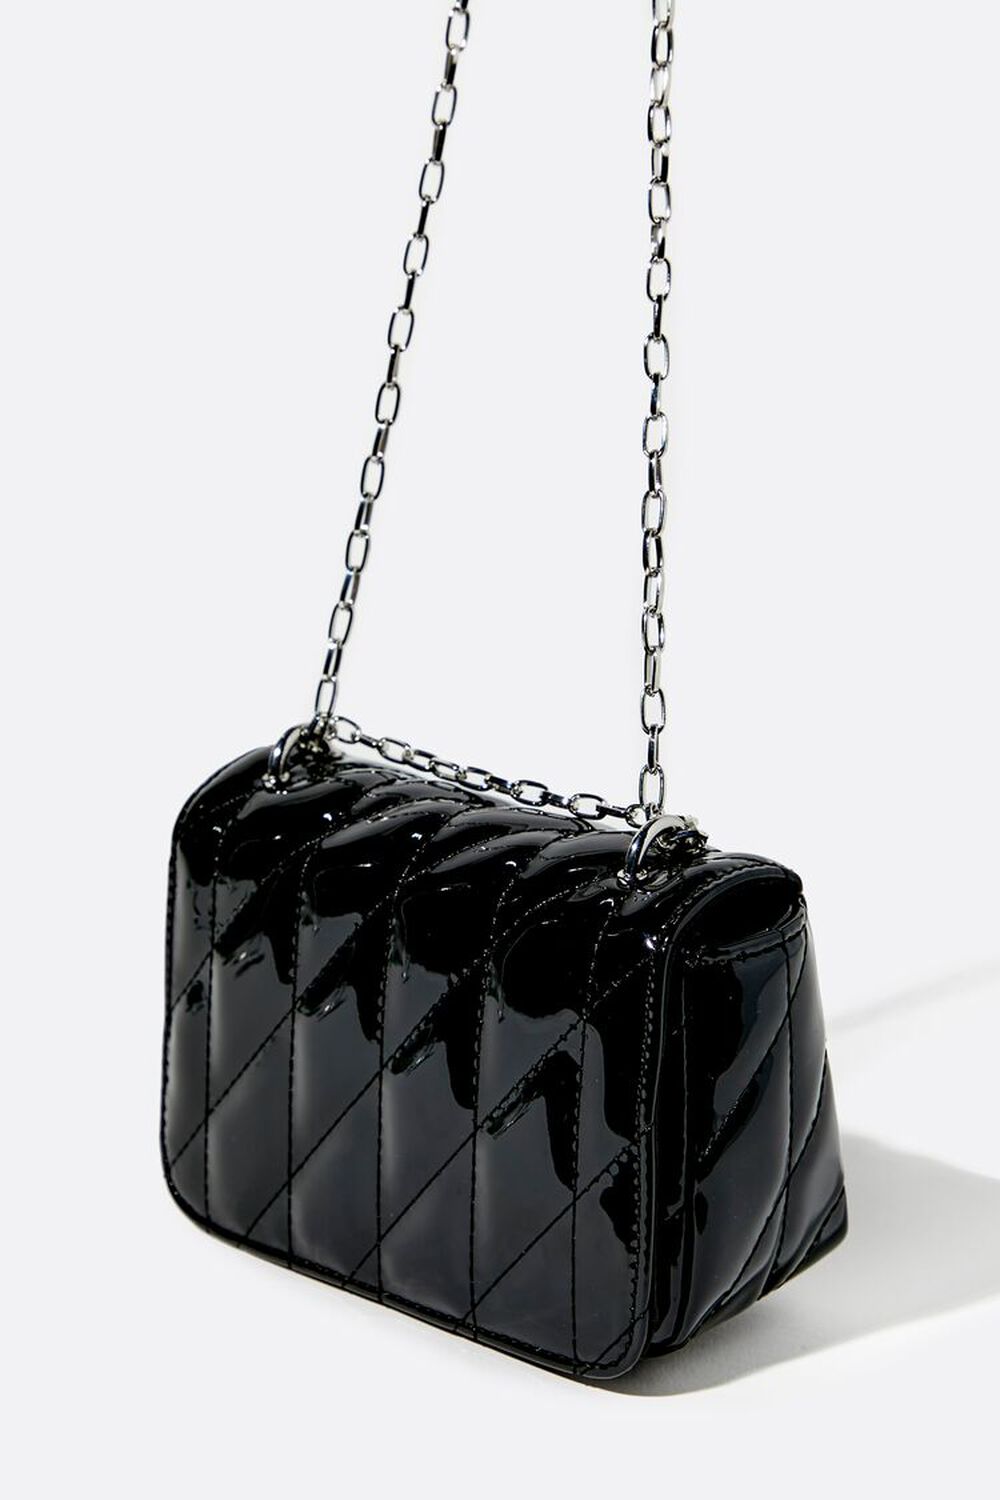 BLACK Faux Patent Leather Quilted Crossbody Bag, image 2